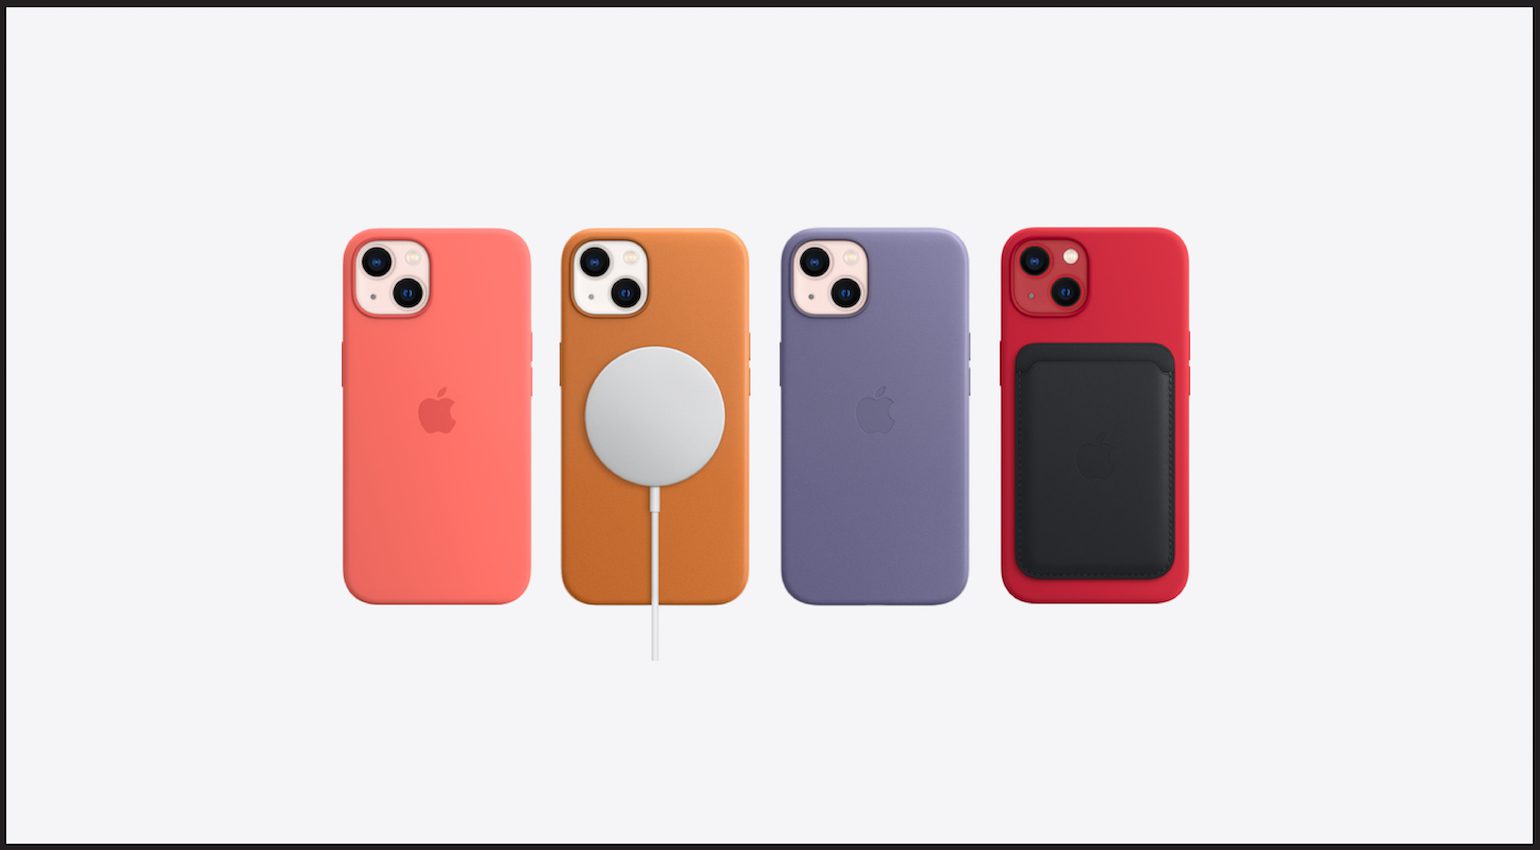 The iPhone 13 range of accessories